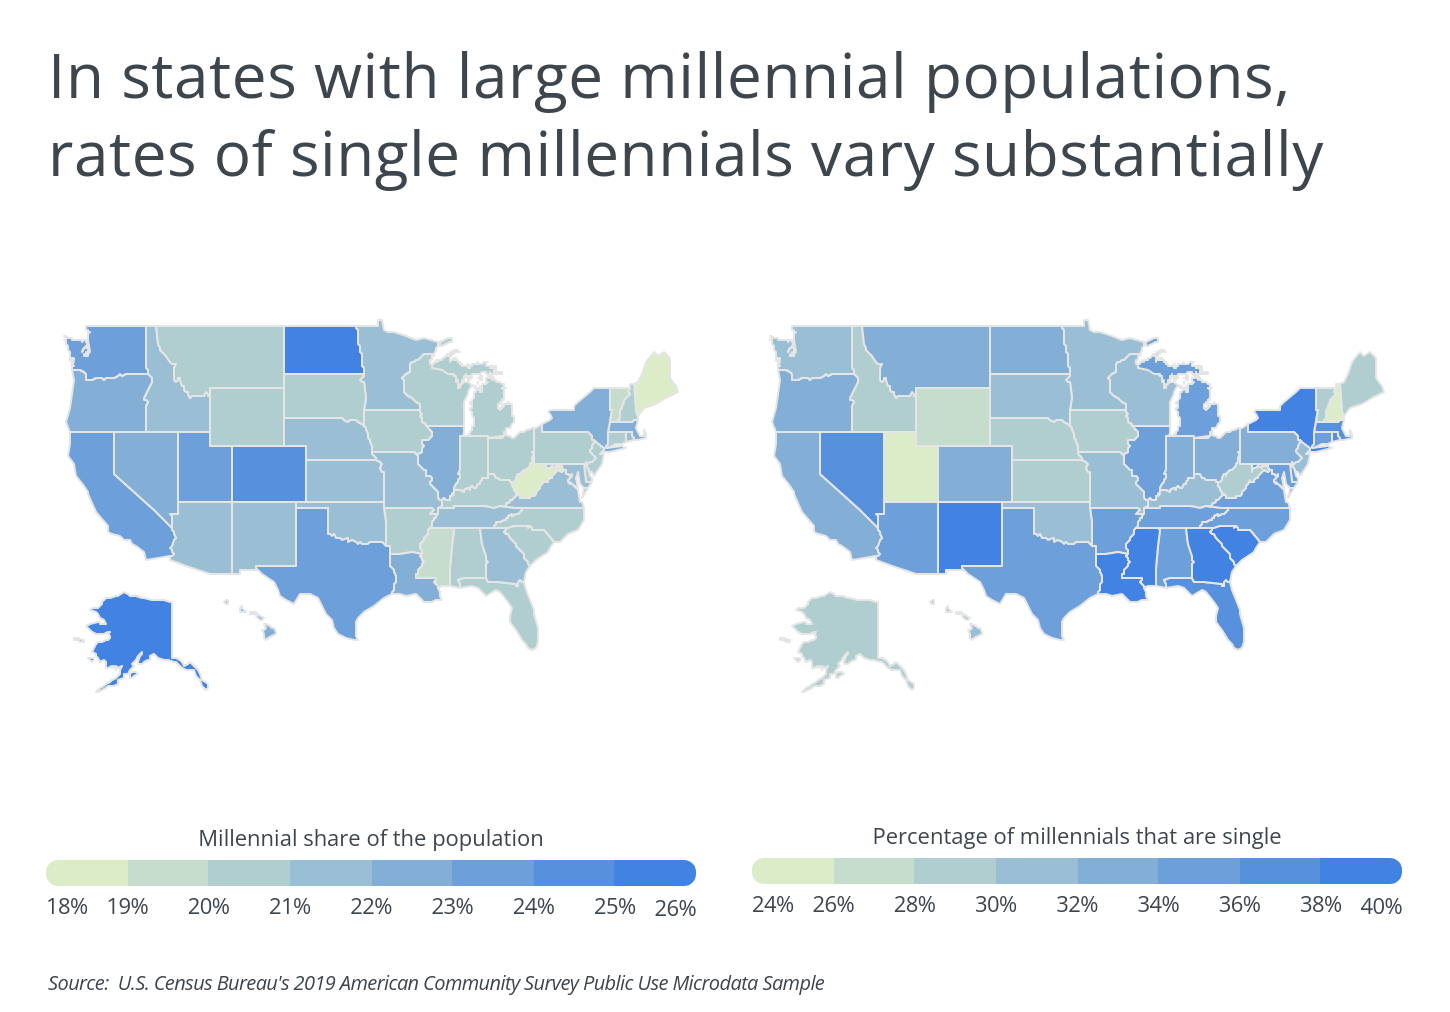 In states with large millennial populations, rates of single millennials vary substantially